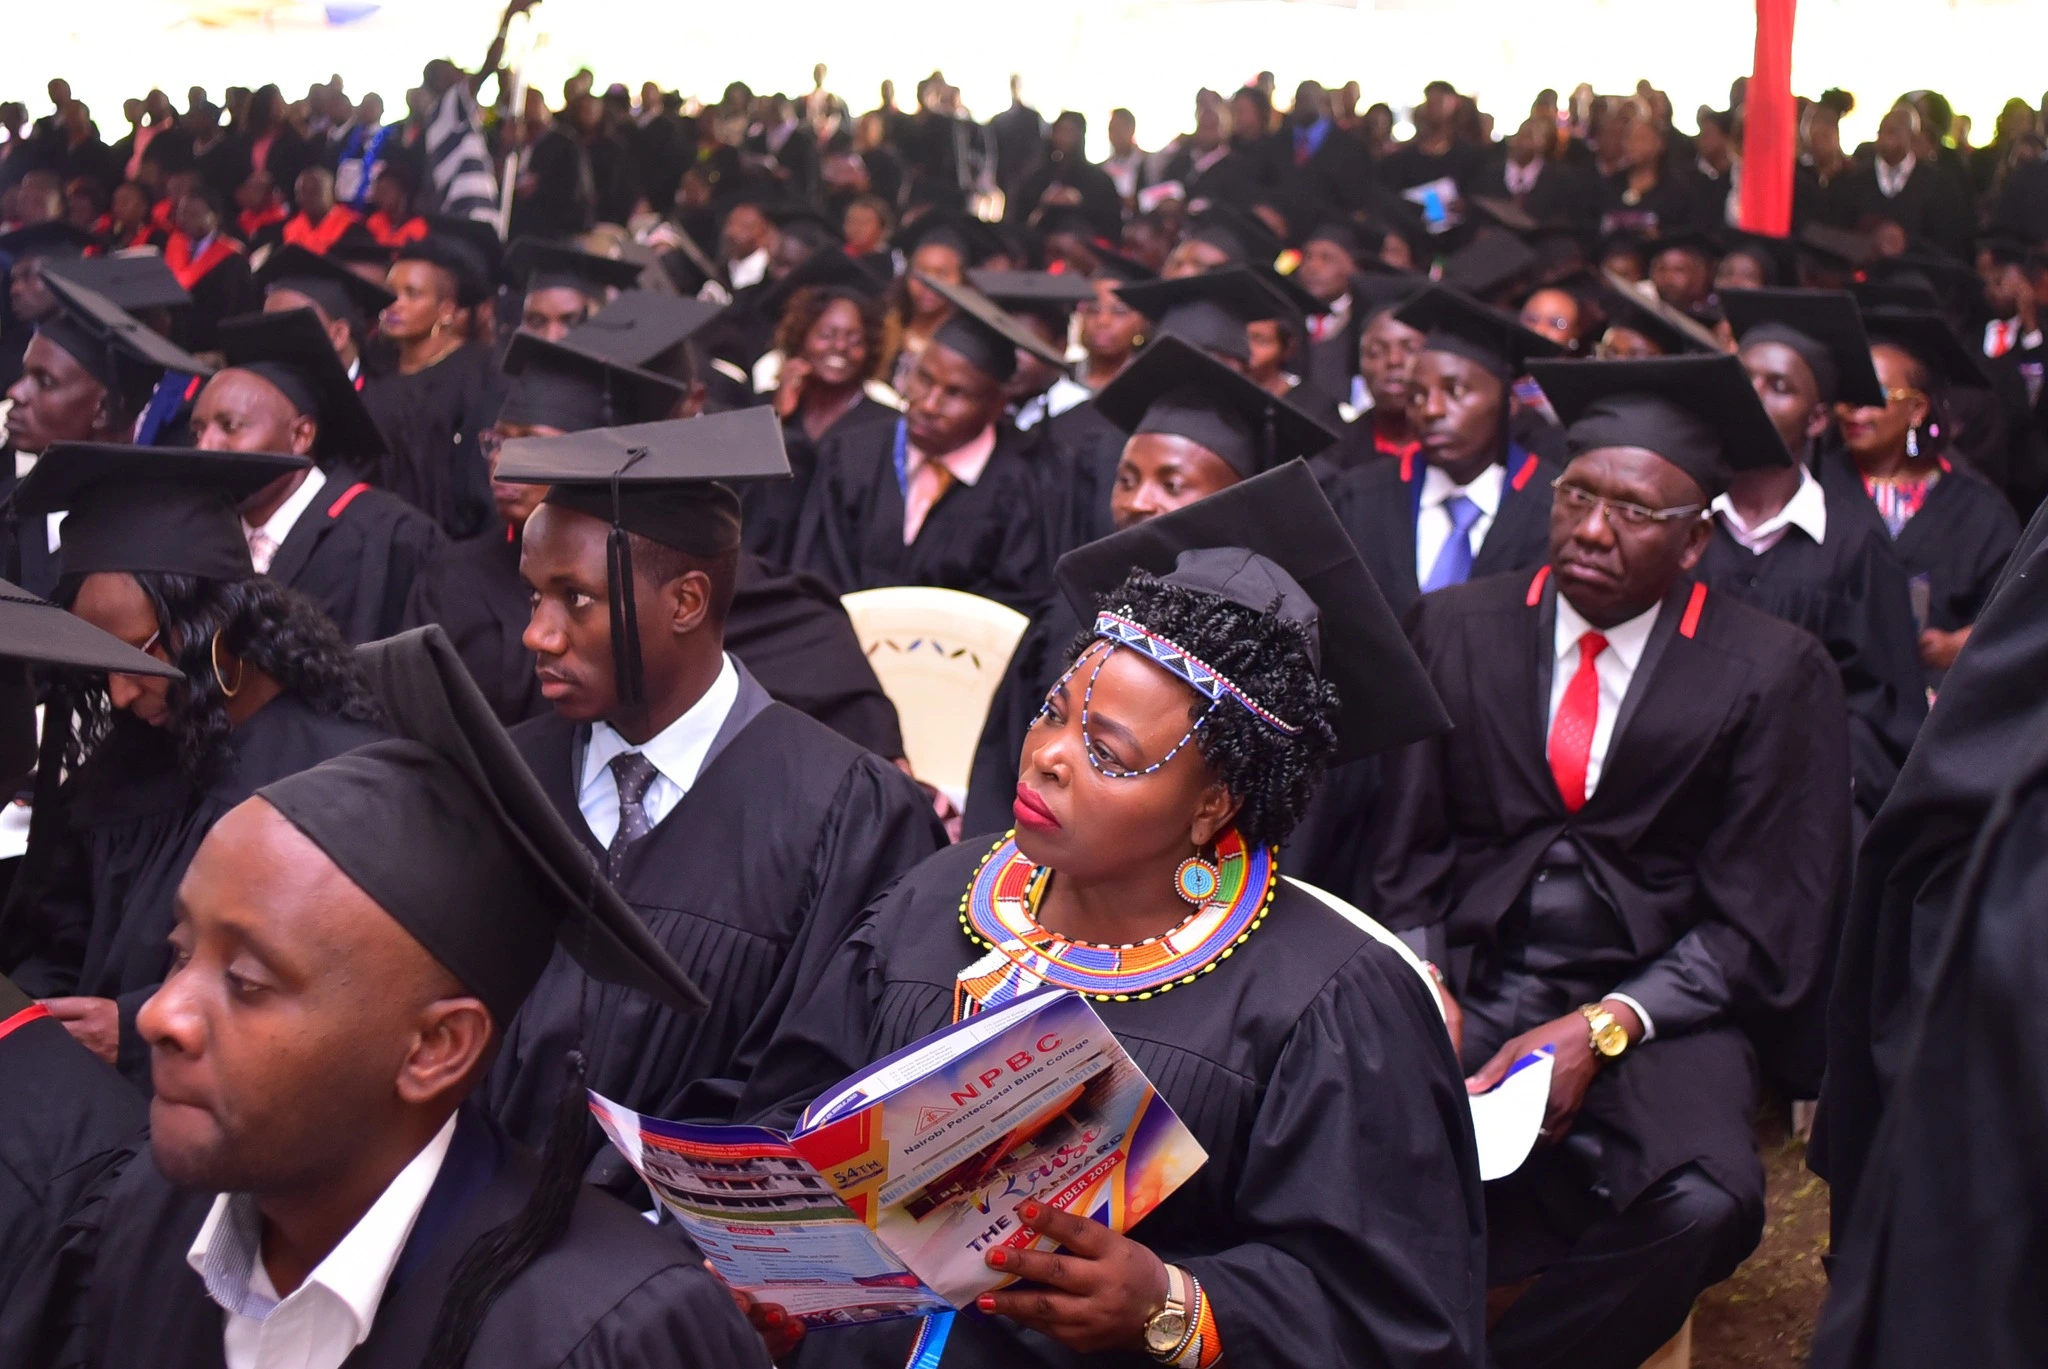 Colleges in donholm nairobi